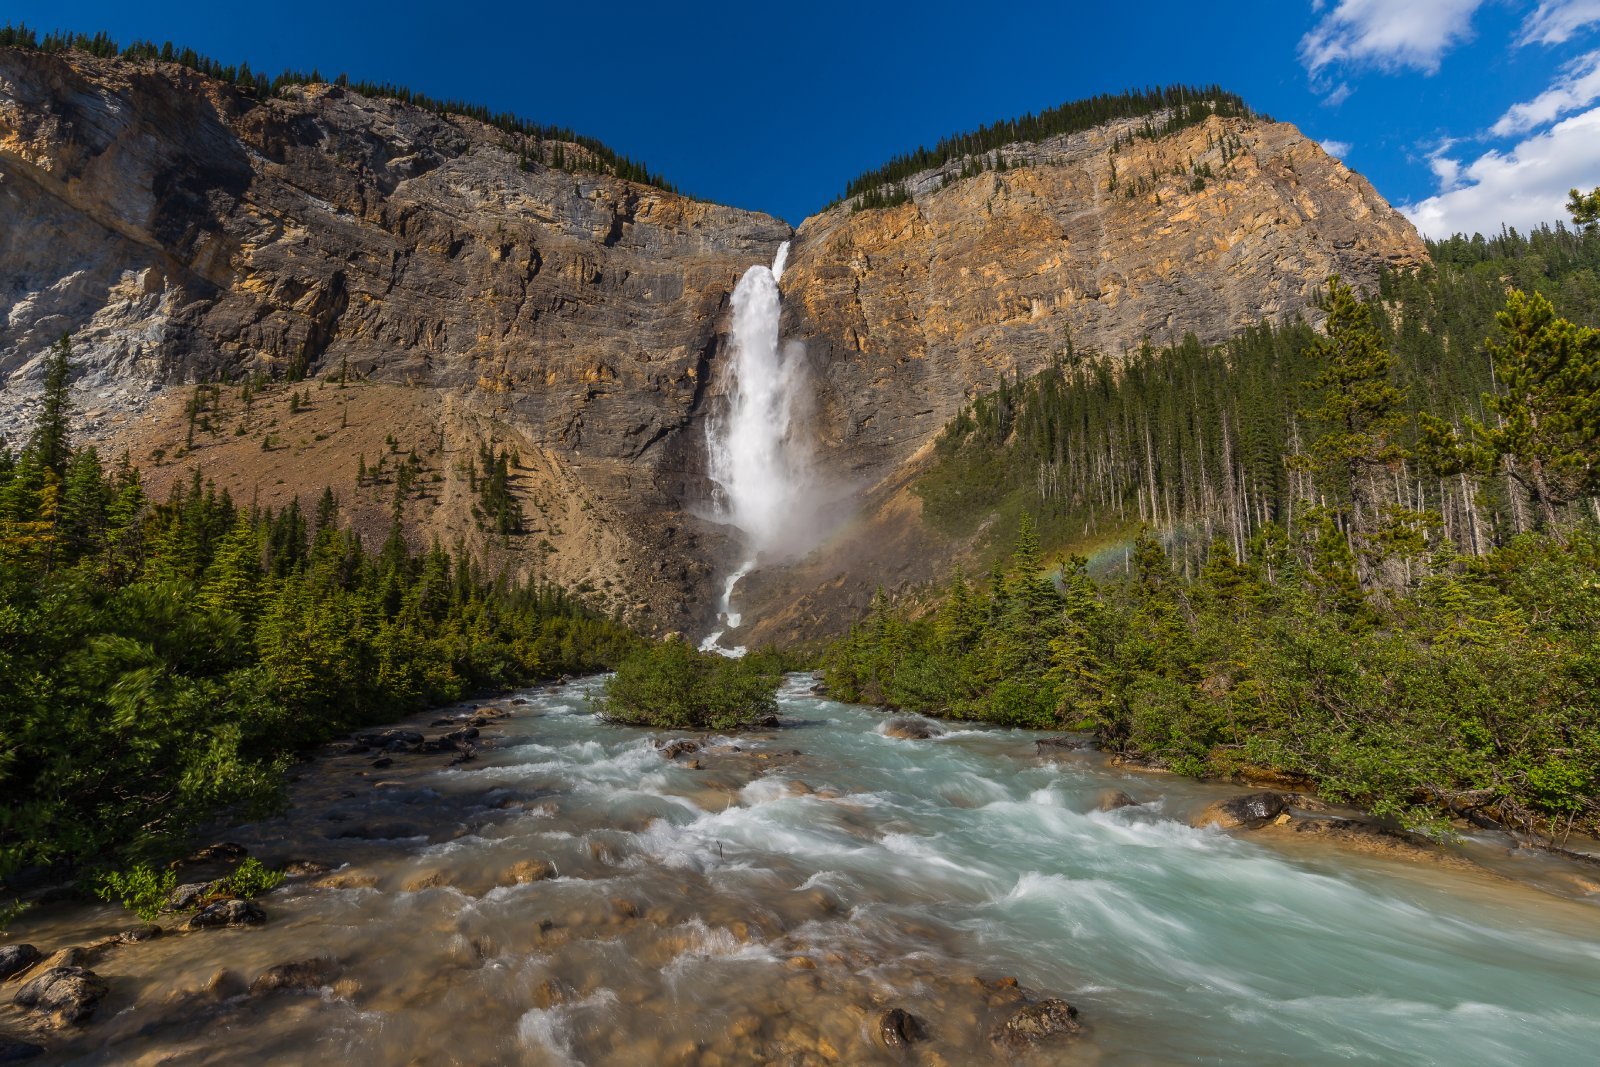 <p class="wp-caption-text">Image Credit: Shutterstock / Pavel Tvrdy</p>  <p><span>Yoho National Park, located on the western slopes of the Canadian Rockies in British Columbia, has thundering waterfalls, towering rock walls, and deep blue lakes. The park’s name, derived from a Cree expression of awe and wonder, perfectly encapsulates the feeling visitors experience. Highlights include the awe-inspiring Takakkaw Falls, one of Canada’s tallest waterfalls, and the natural rock bridge spanning the Kicking Horse River. </span></p>